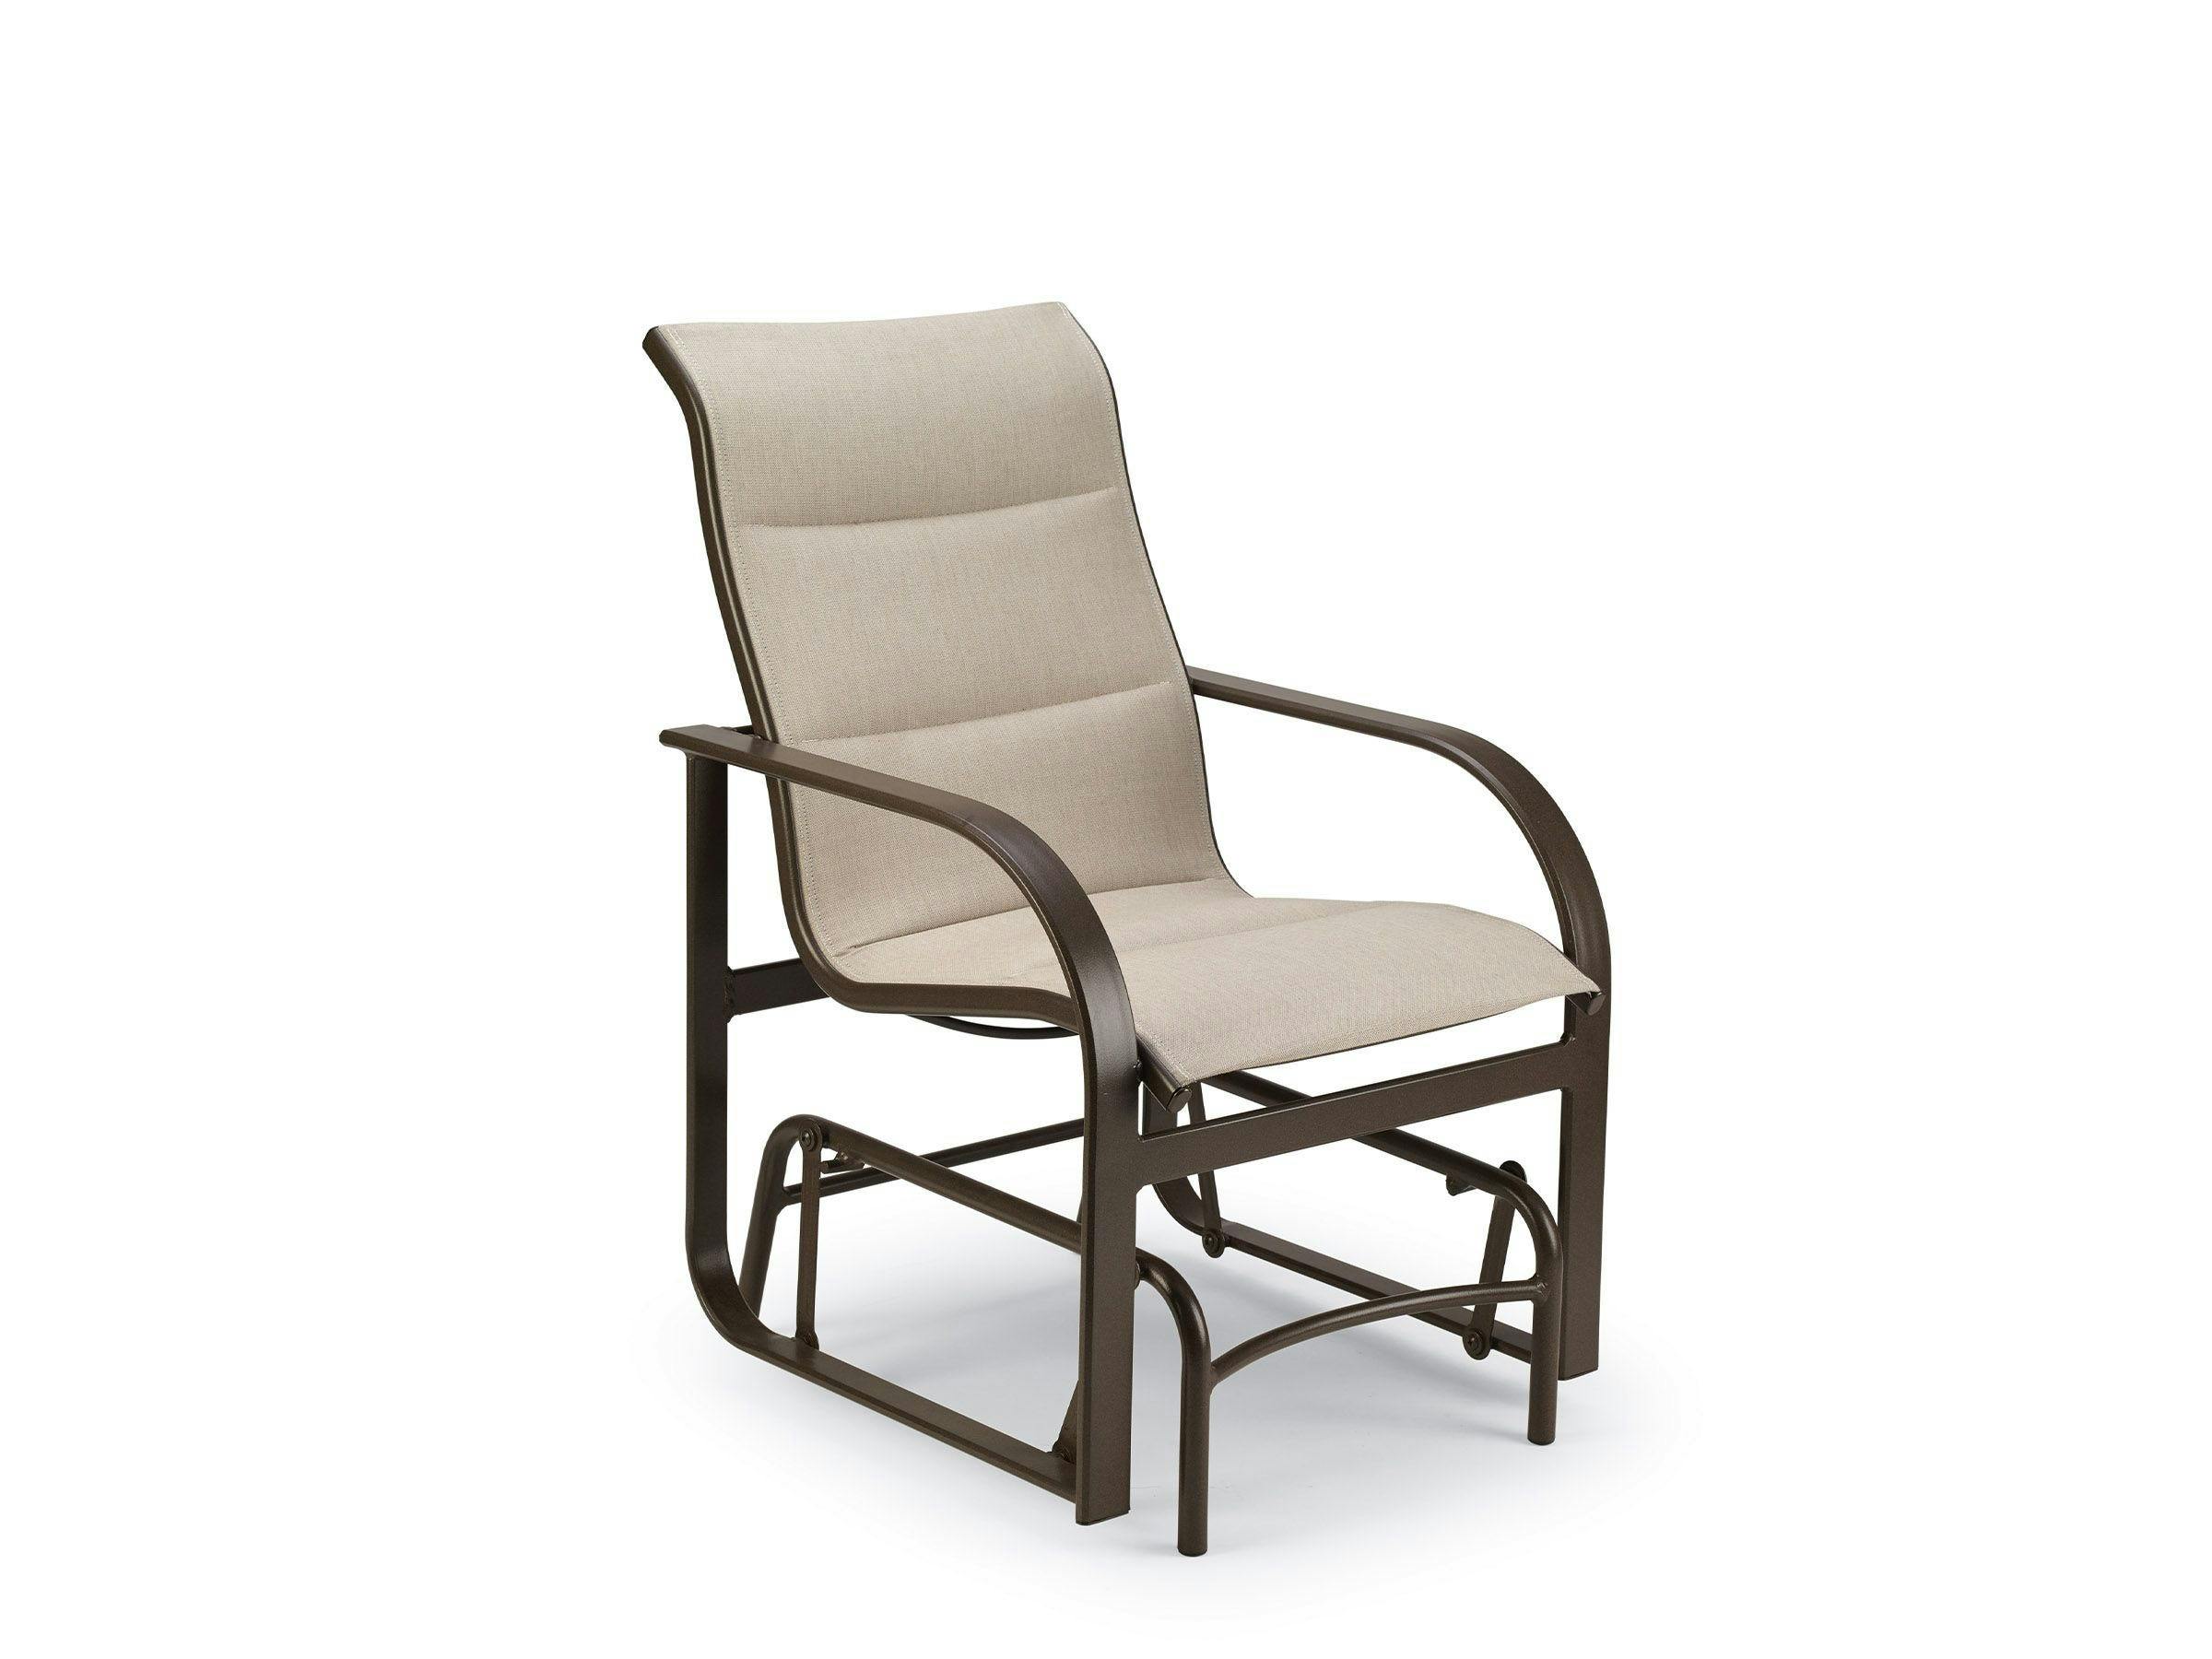 Key West Padded Sling Chair Glider